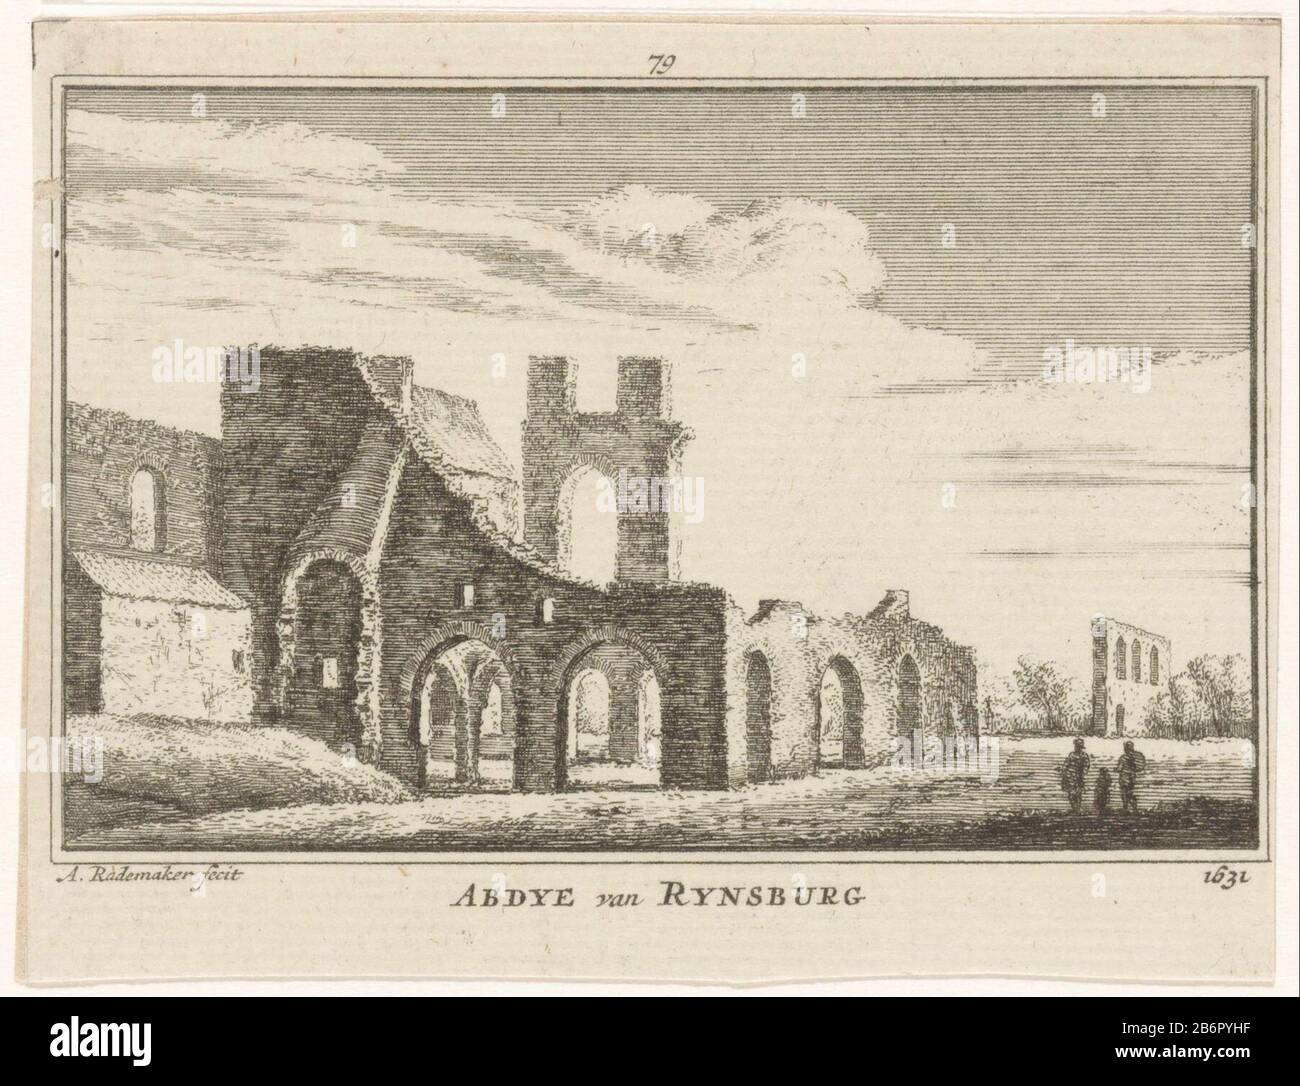 View of the ruined in 1574 ruined abbey of Rijnsburg in the situation around 1631. Manufacturer : printmaker: Abraham Rademaker (listed property) Place manufacture: Amsterdam Date: 1725 - 1803 Material: paper Technique: etching / engra ( printing process) Measurements: sheet: h 82 mm × W 107 mmToelichtingPrent also used in: Rademaker, Abraham. Cabinet Dutch outheden and faces: constant contained in 300 banks (...). 2 parts. Amsterdam: Willem Barents, 1725, vol. 1, ill. 79. After 1725, this post yet published in various reissues, published in 1727-1733, 1770-1771 and 1792-1803. Which edition th Stock Photo